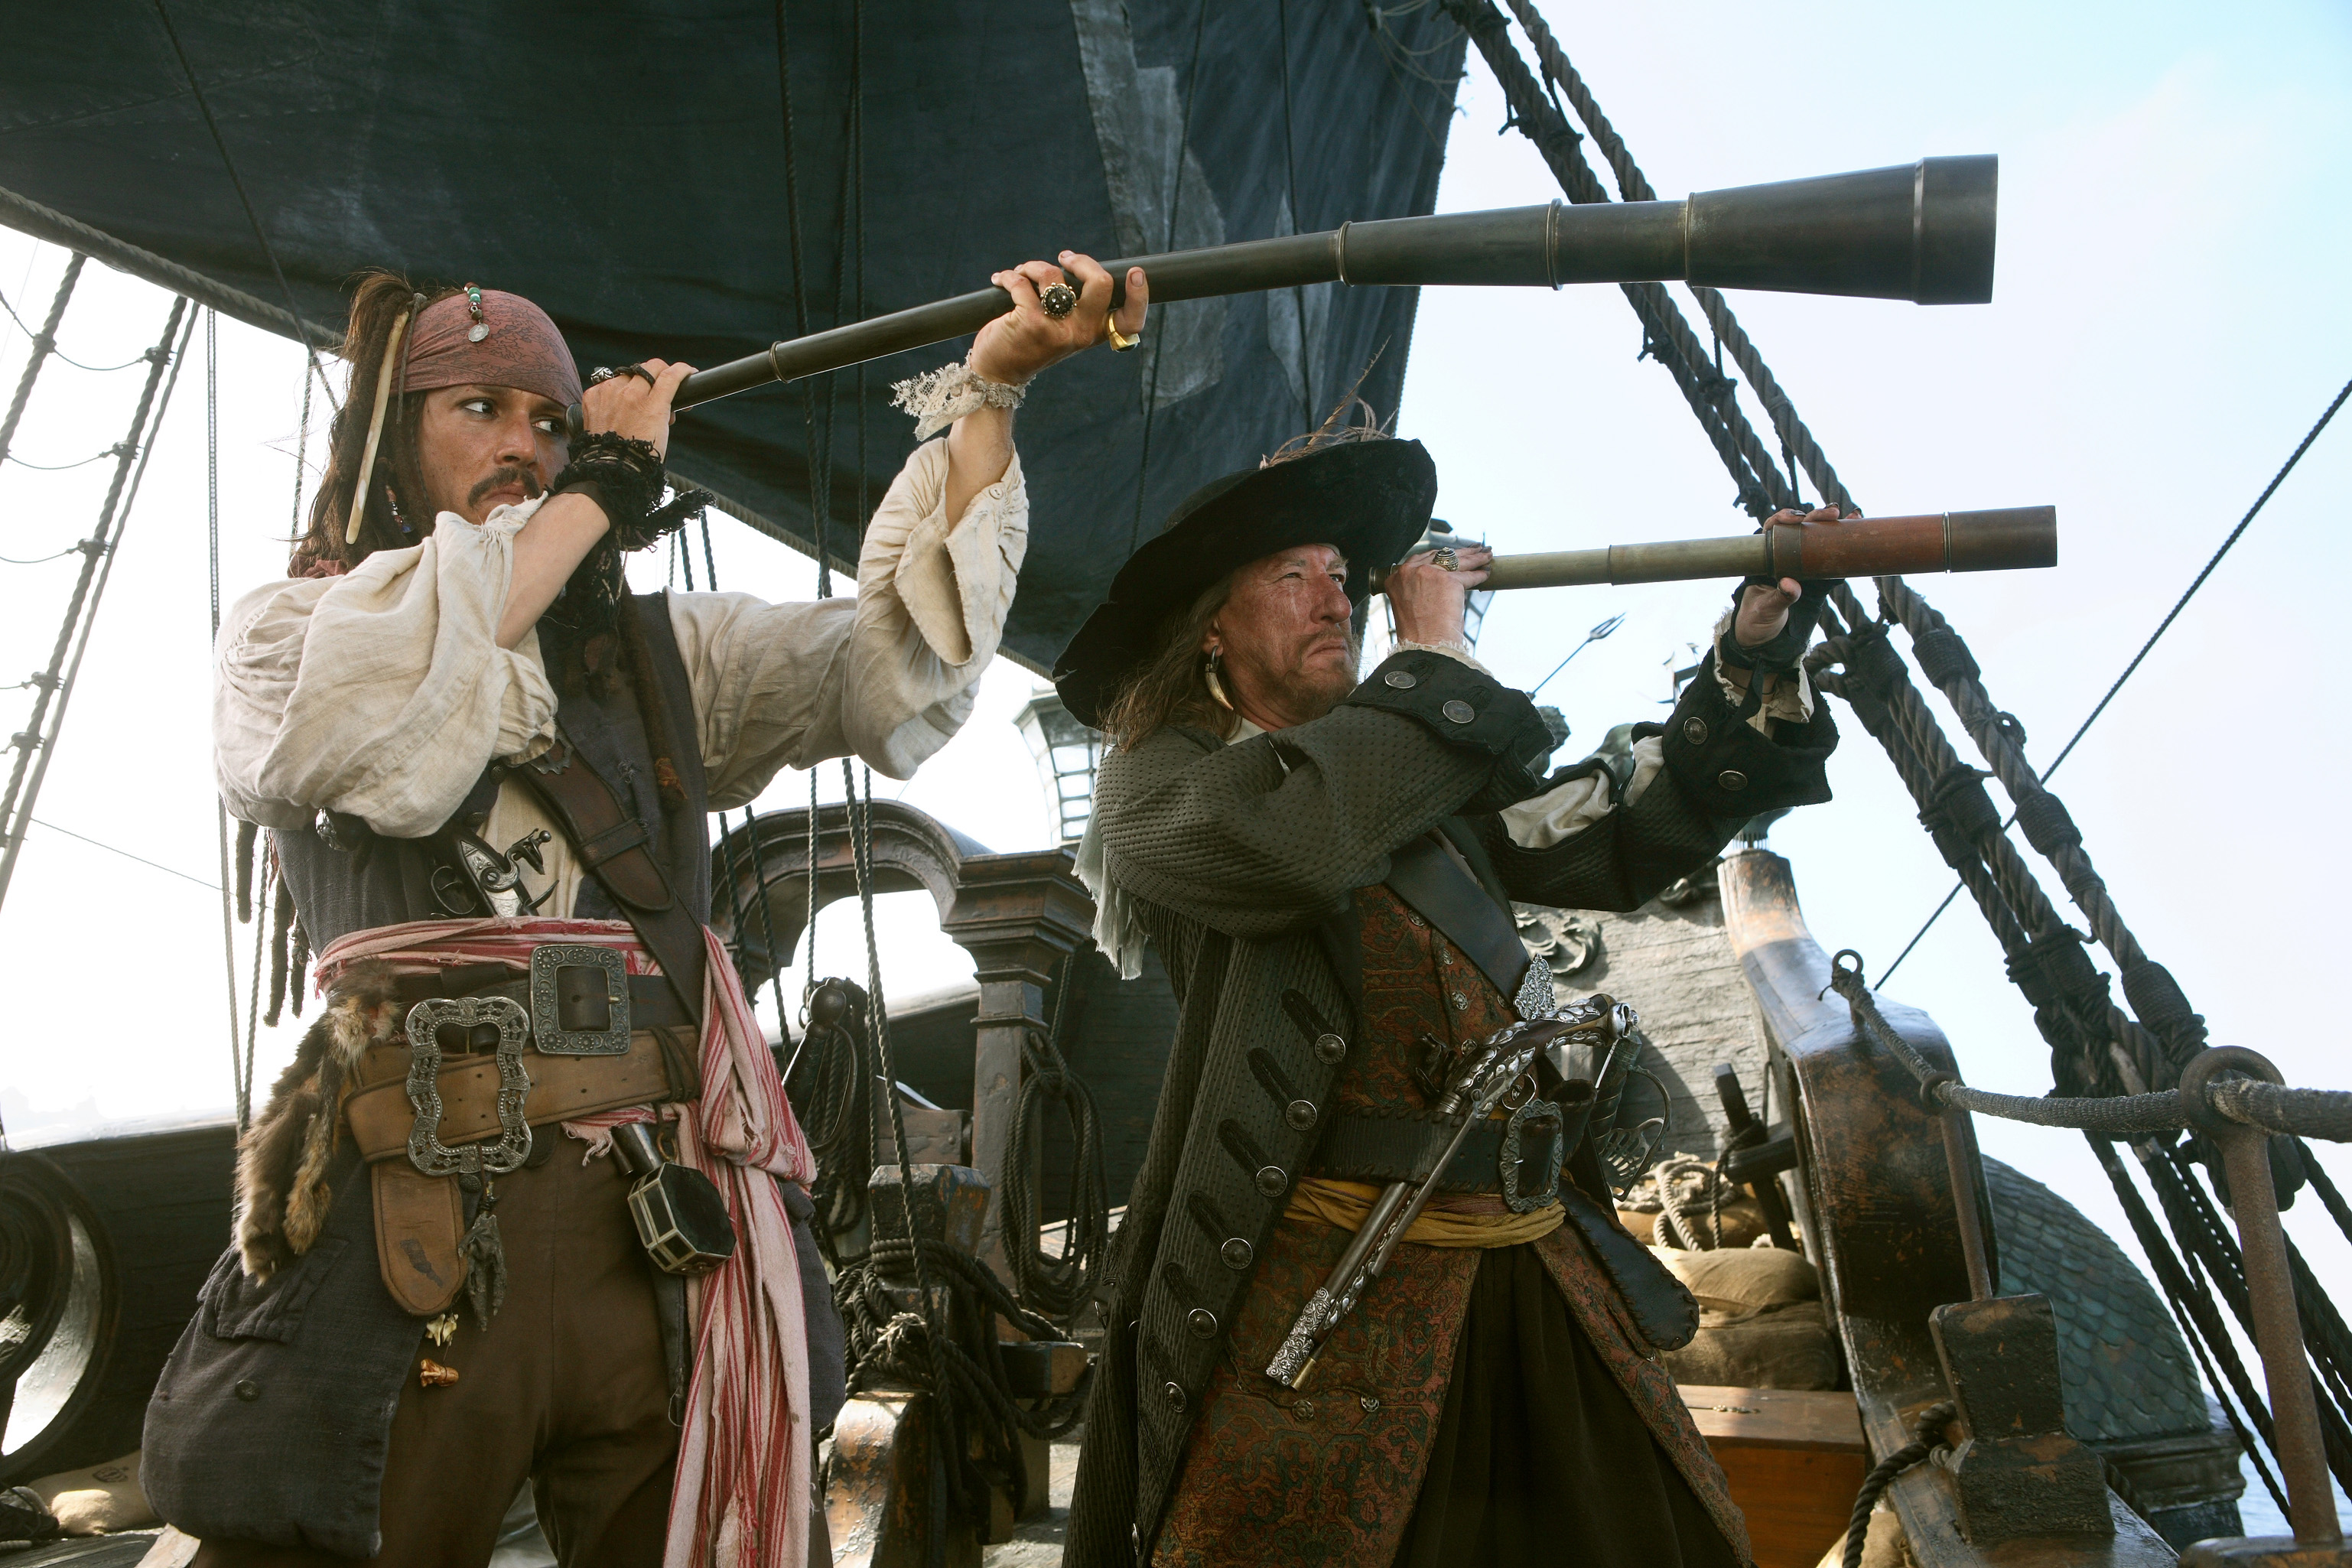 jack sparrow, movie, pirates of the caribbean: at world's end, geoffrey rush, hector barbossa, johnny depp, pirates of the caribbean